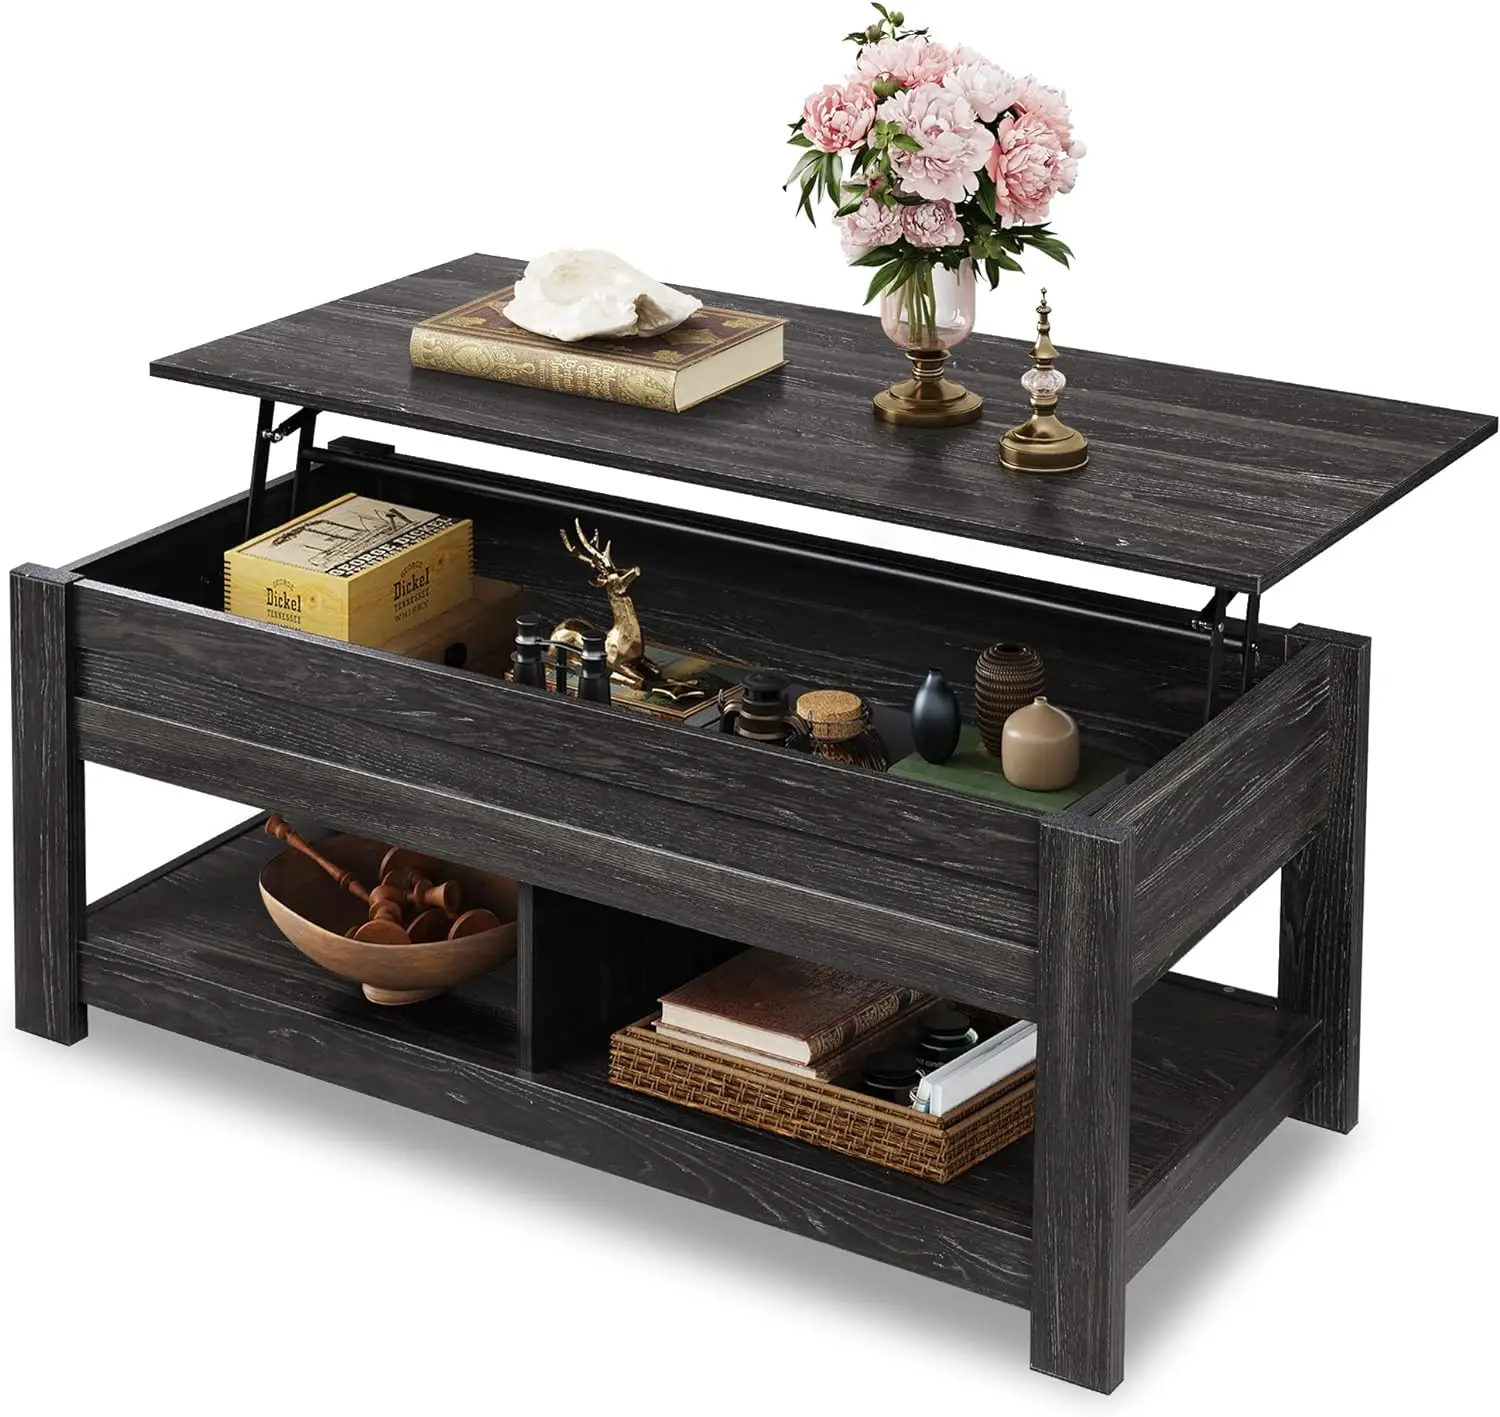 

Modern Lift Top Coffee Table,Rustic Coffee Table with Storage Shelf and Hidden Compartment,Wood Lift Tabletop for Home Living